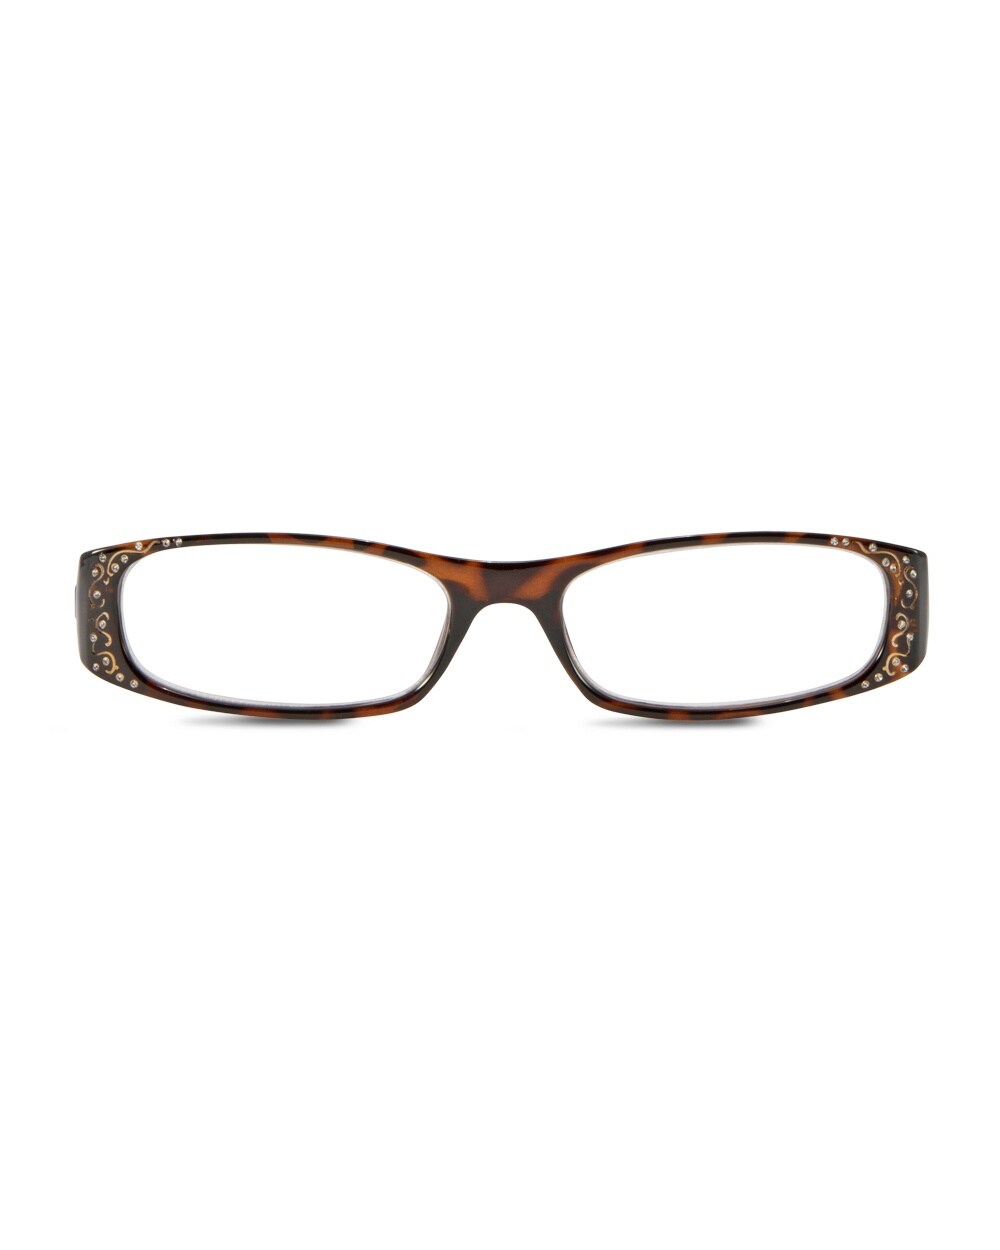 Etched Animal-Print Reading Glasses